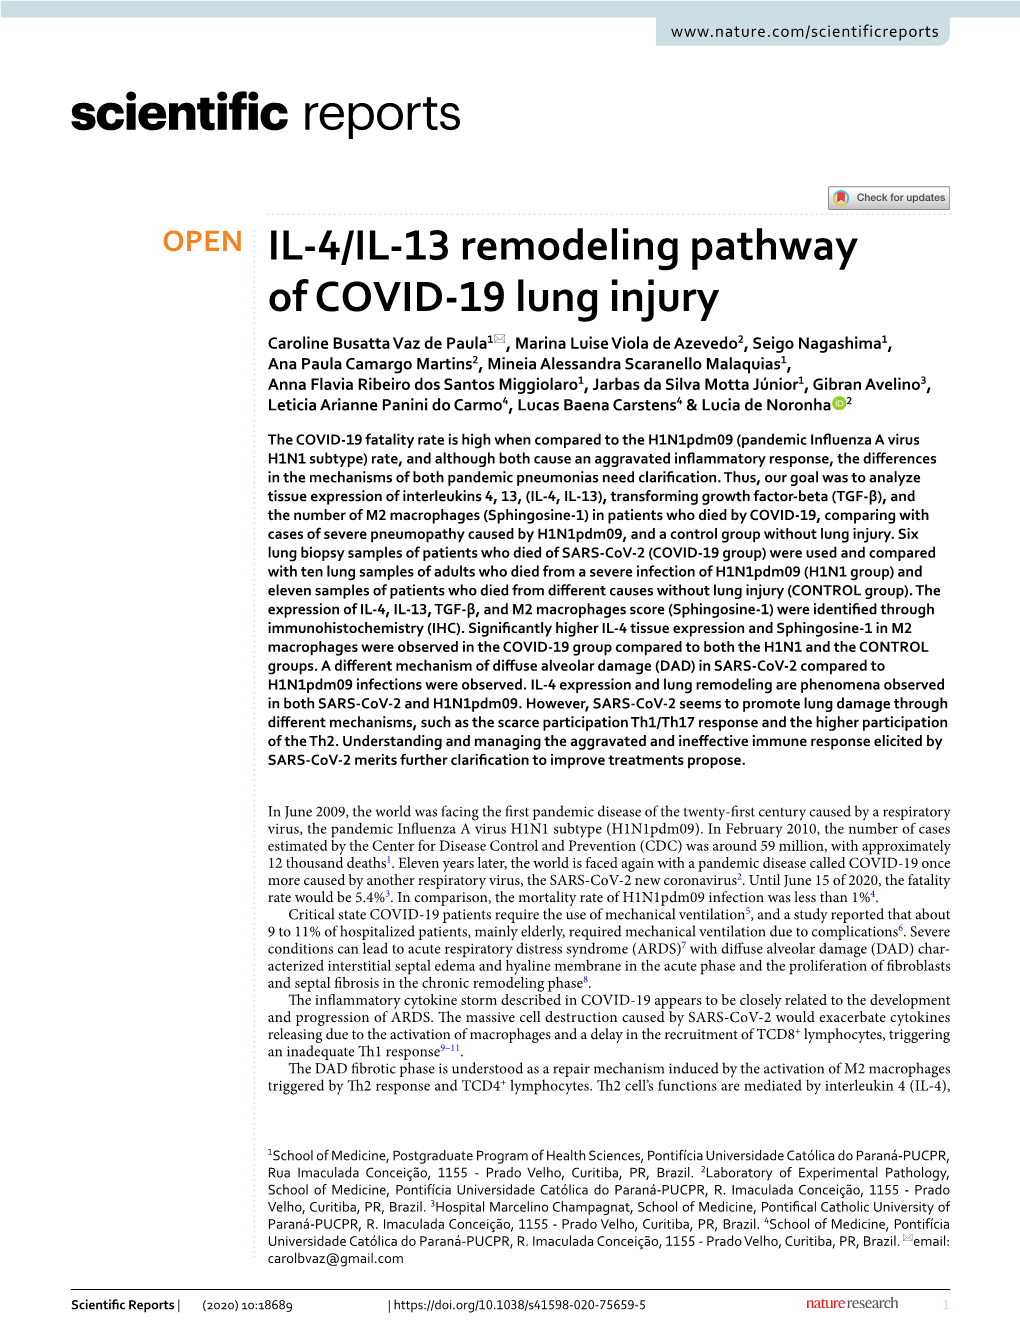 IL-4/IL-13 Remodeling Pathway of COVID-19 Lung Injury